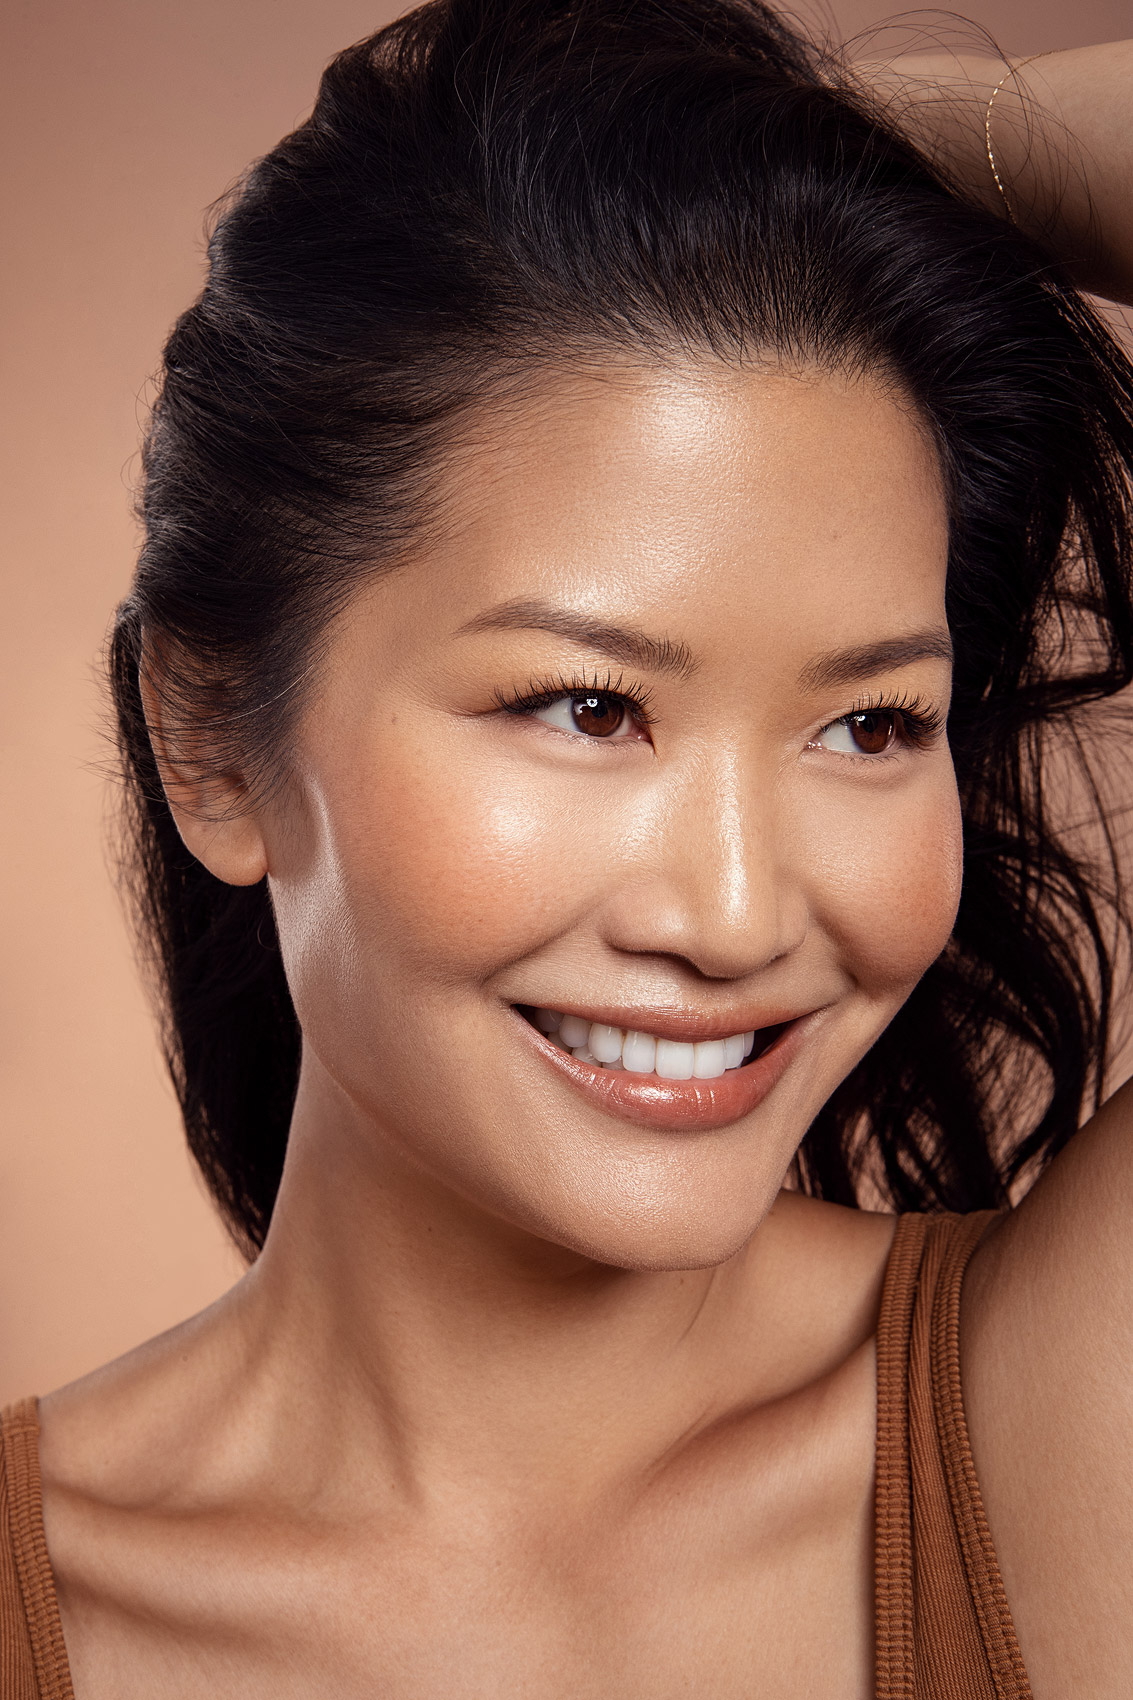 Danielle_Yu-10171 Clean Beauty Photography by Ylva Erevall